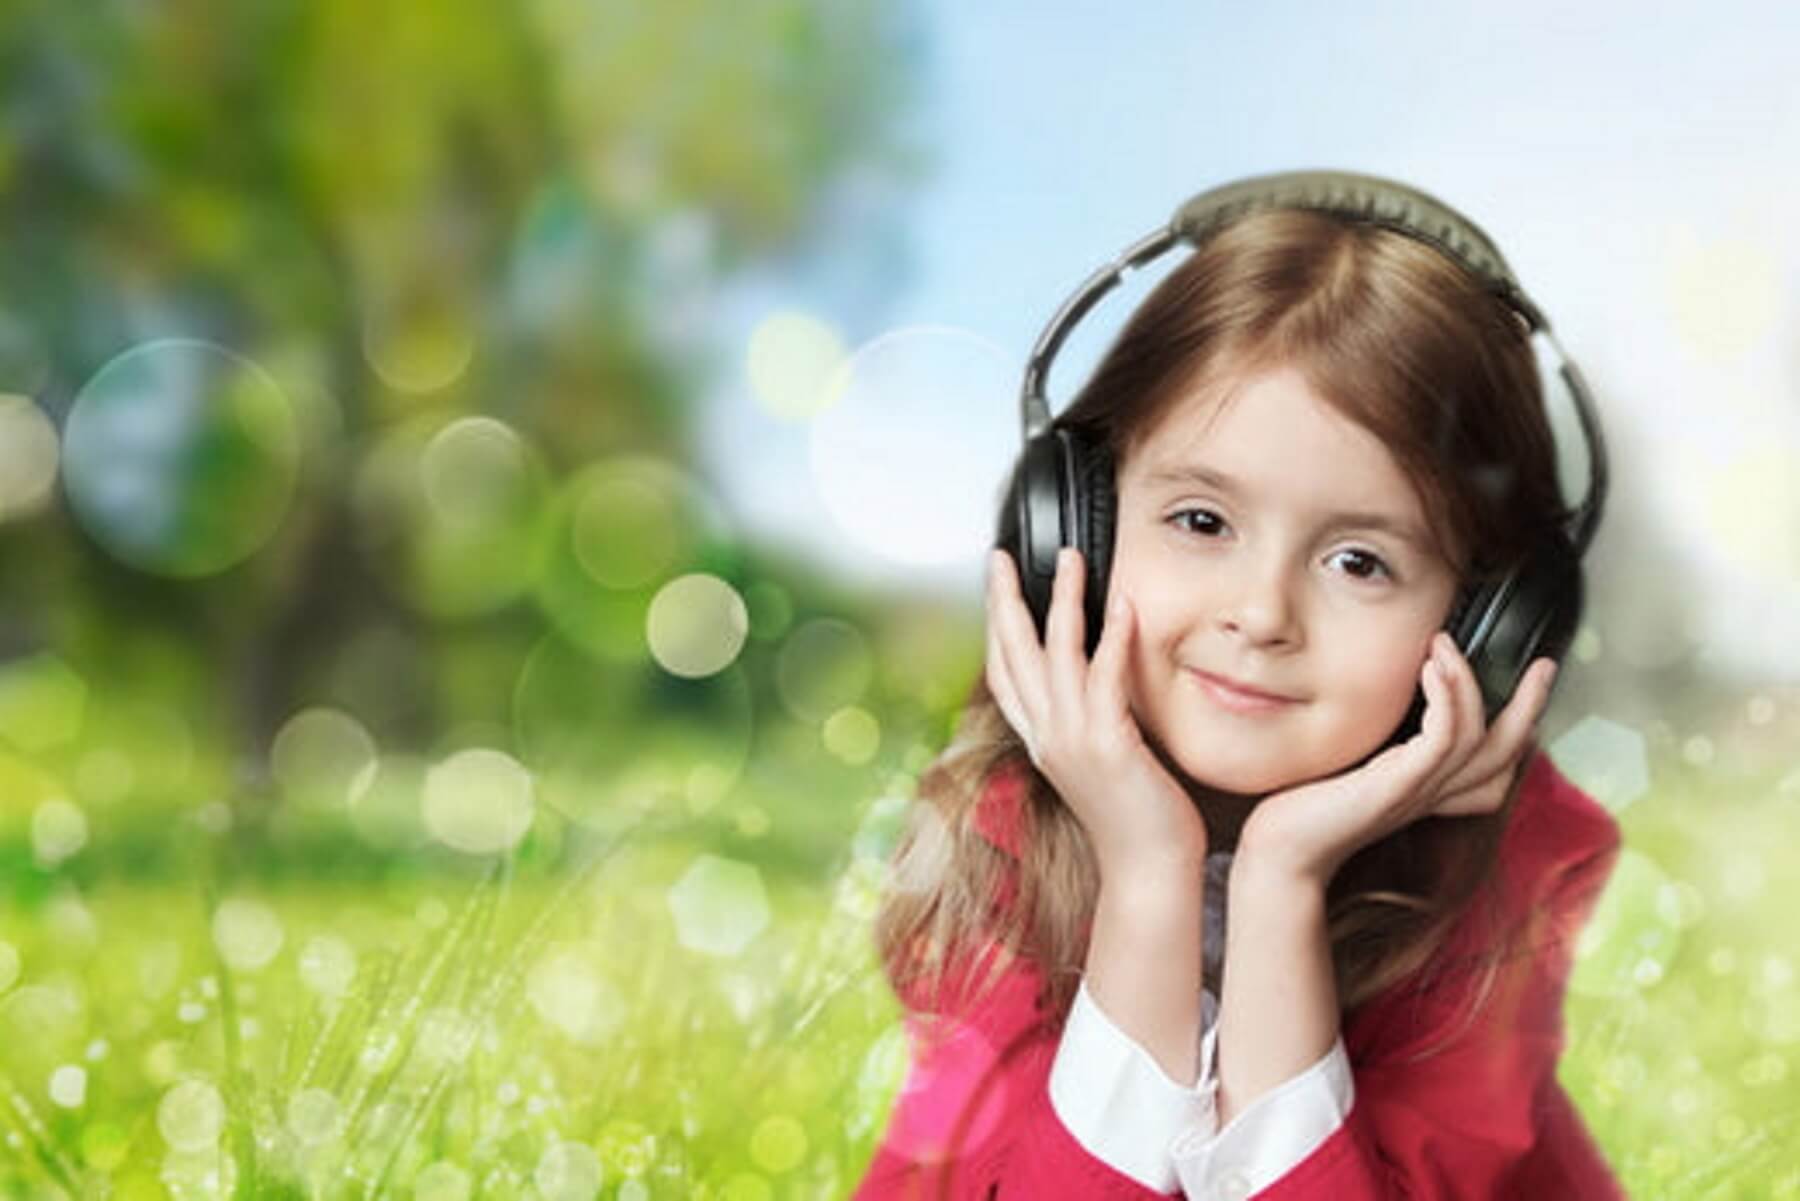 Headphones are good for more than just listening to music or watching the latest Netflix show. They can be used in the classroom for any number of creative learning activities.